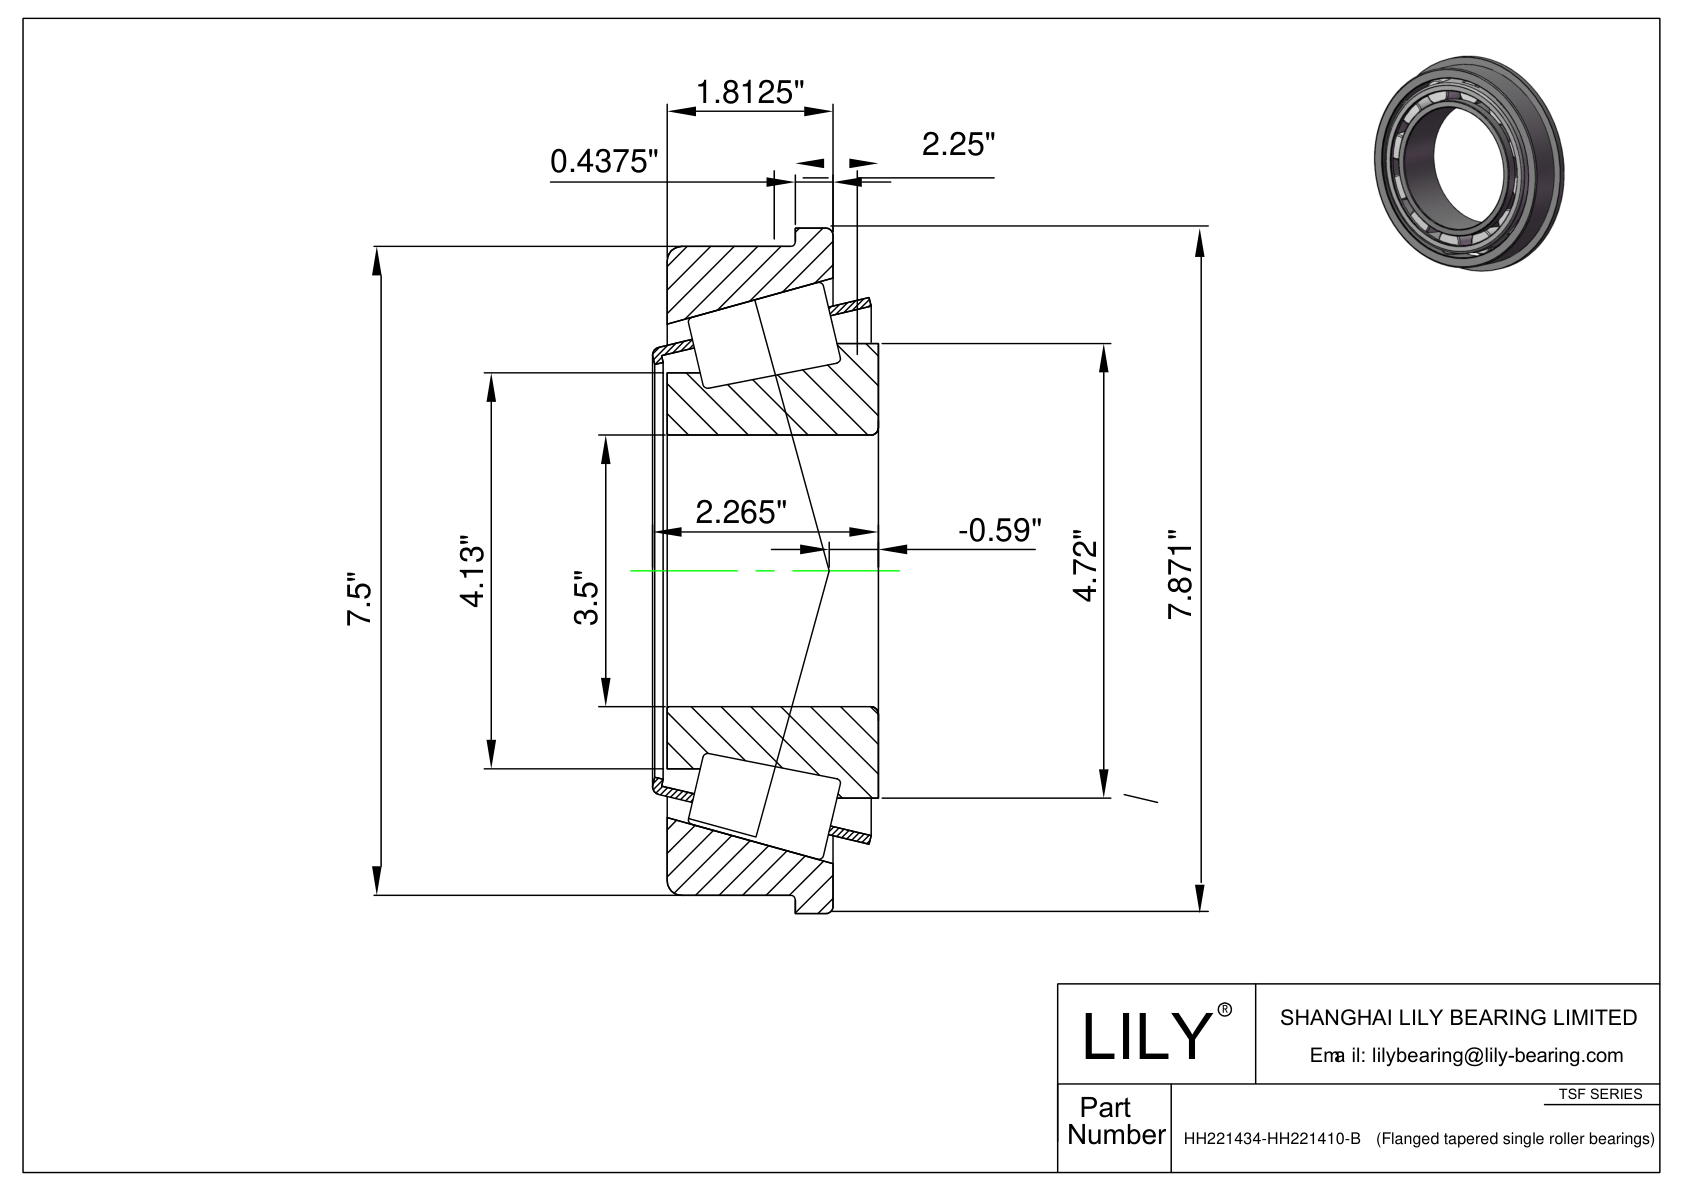 HH221434-HH221410-B TSF (Tapered Single Roller Bearings with Flange) (Imperial) cad drawing